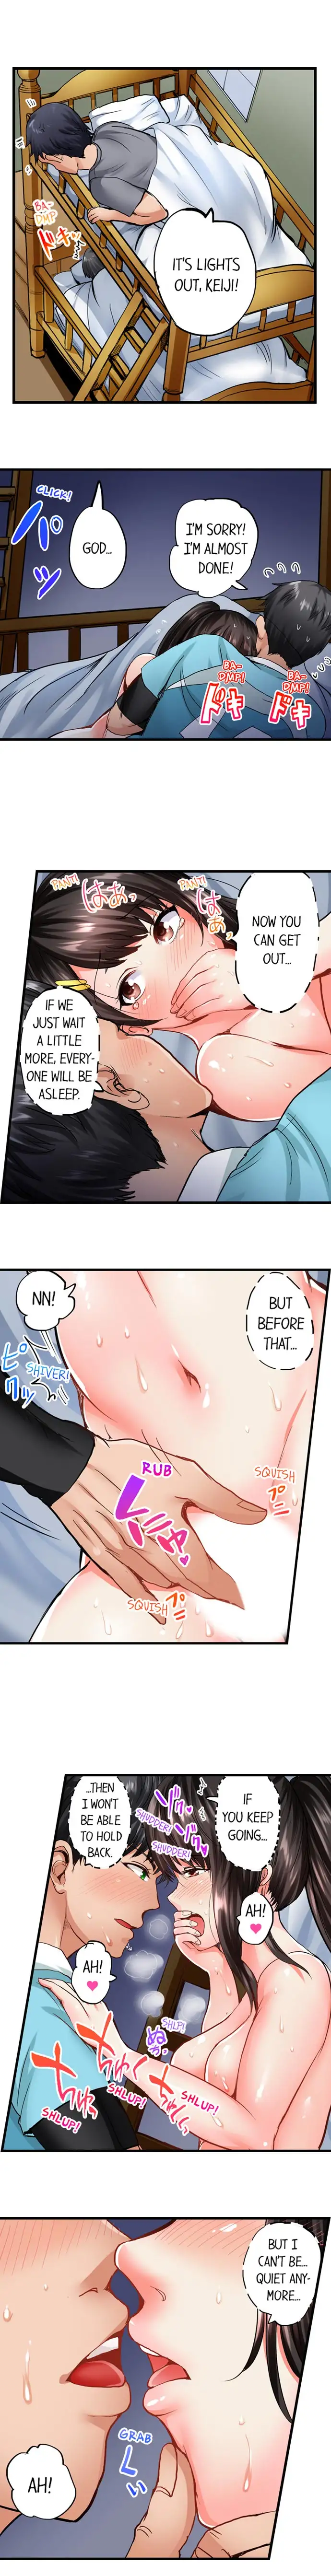 Dick Me Up Inside - Chapter 3 Page 7